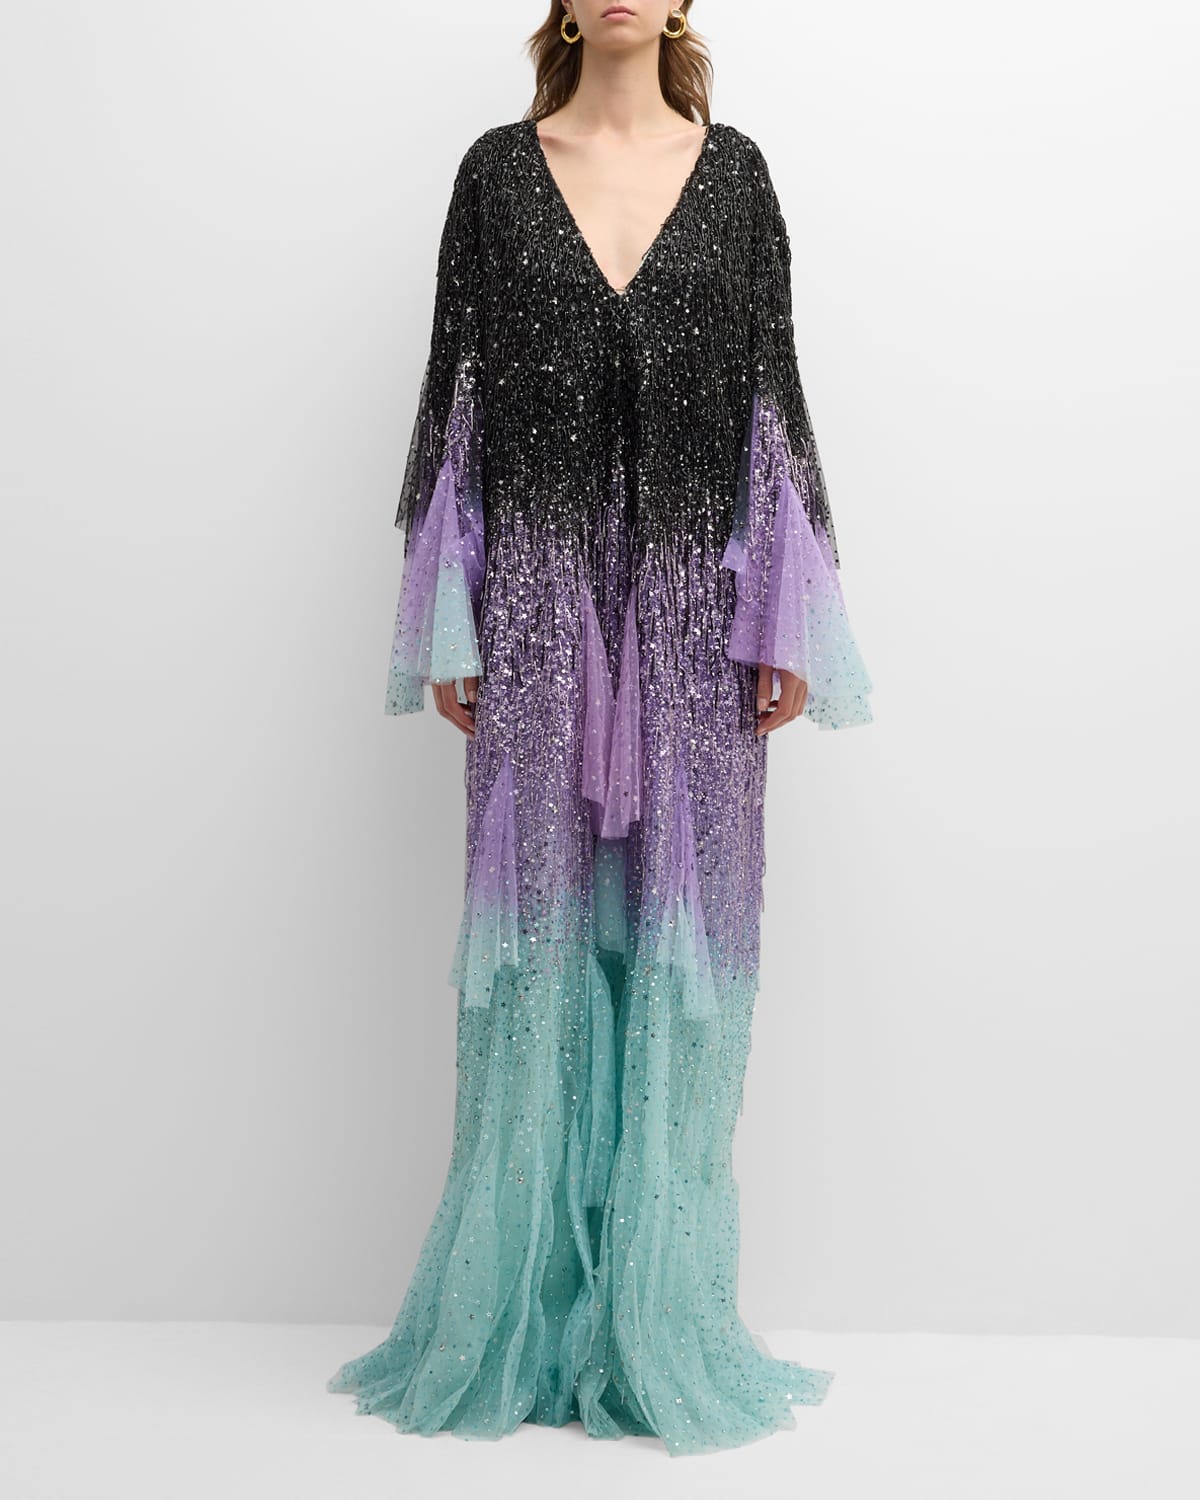 Plunging Degrade Embellished Ruffle Tulle Kaftan Gown